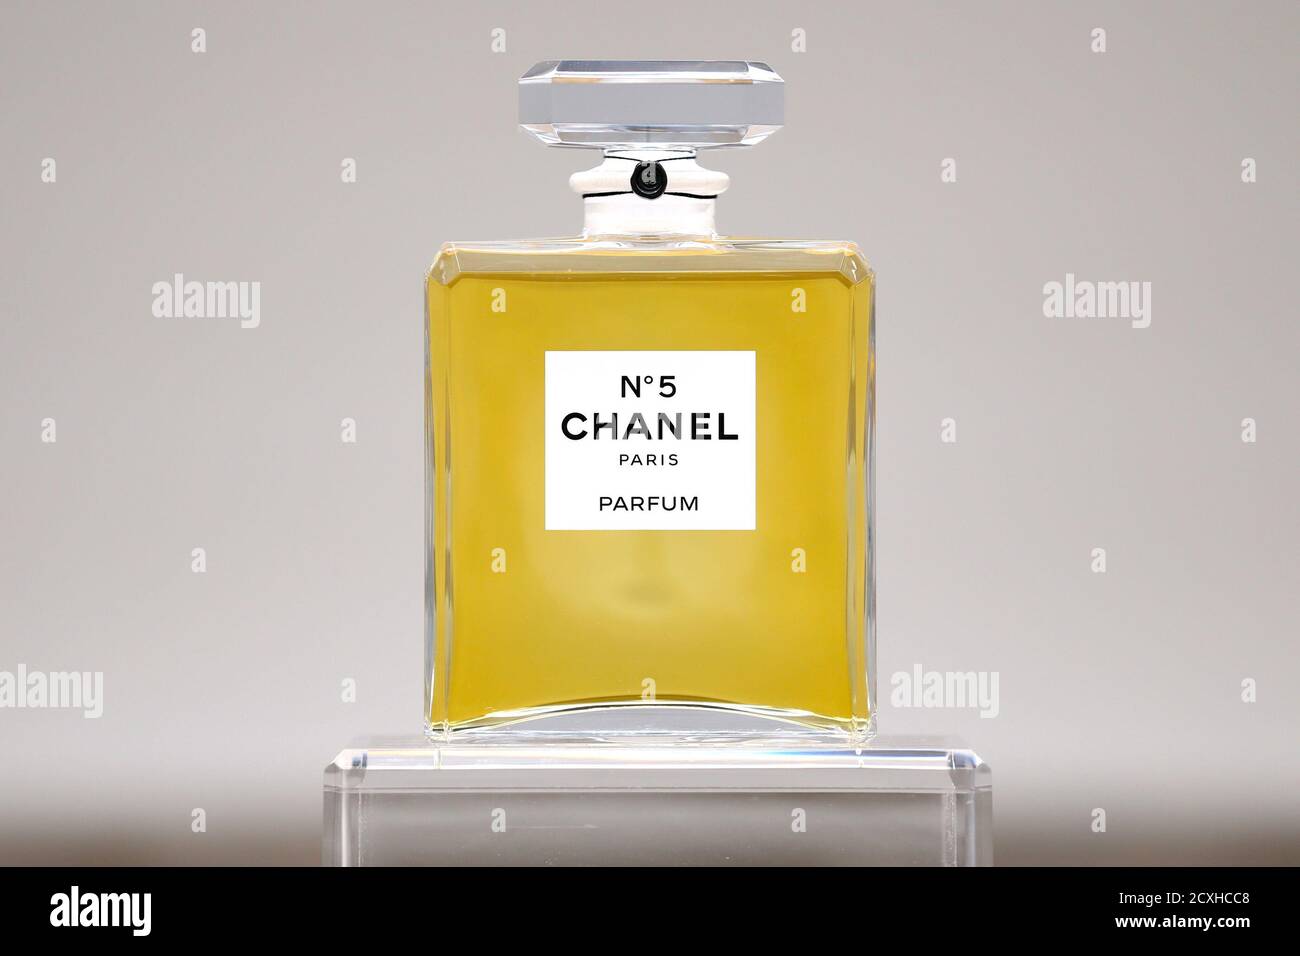 A bottle of CHANEL No. 5 perfume is seen during the No. 5 CULTURE CHANEL  exhibit at the Palais de Tokyo in Paris May 3, 2013. The exhibition, which  runs from May